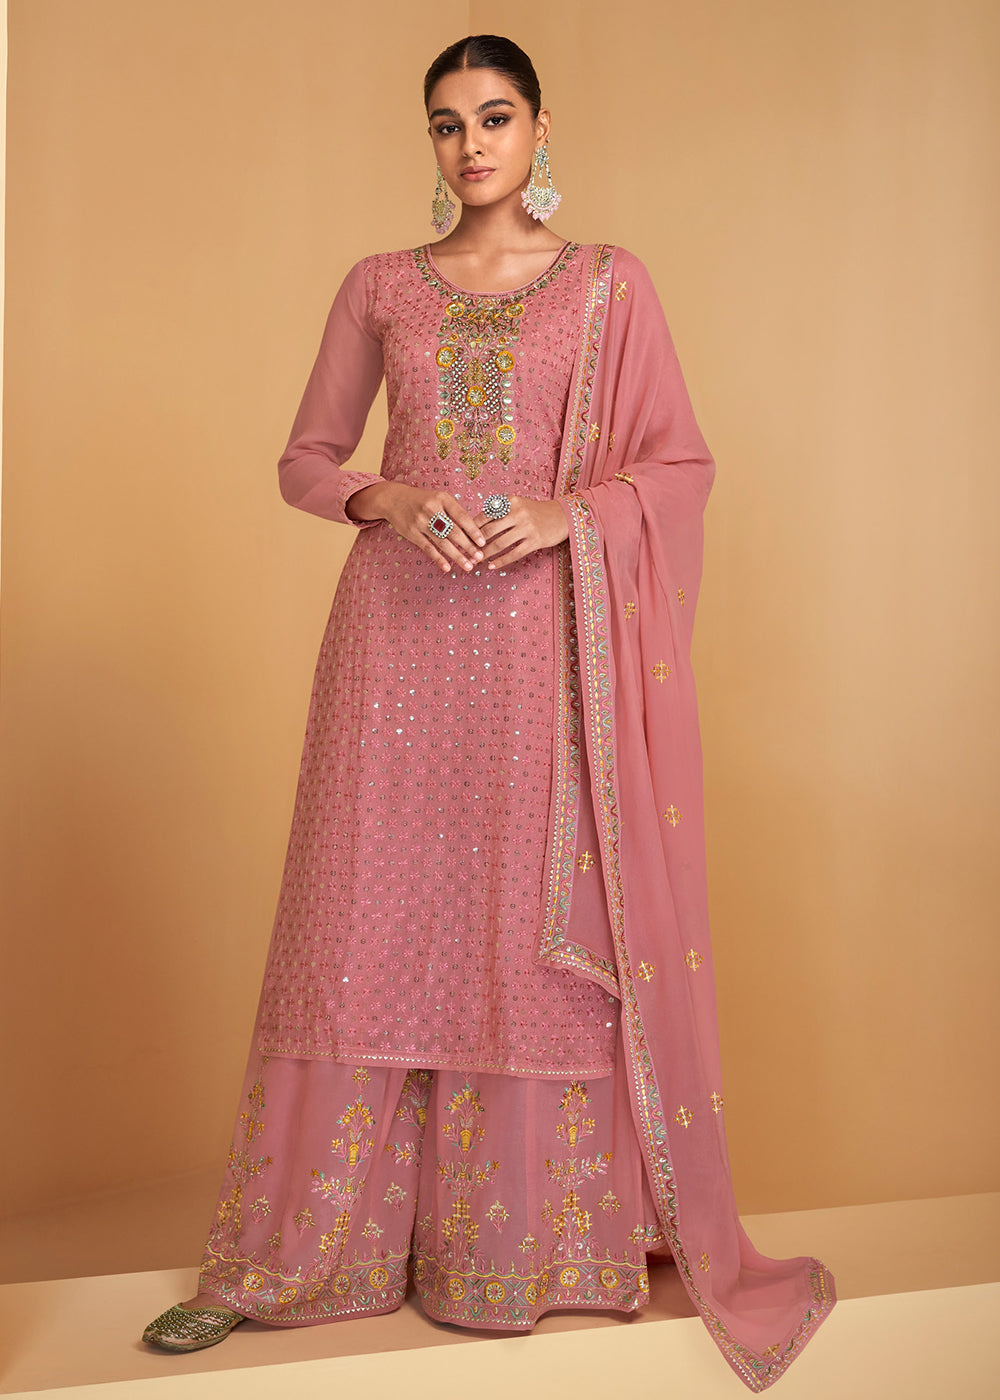 Buy Now Festive Look Pink Floral Embroidered Palazzo Style Suit Online in USA, UK, Canada, Germany, Australia & Worldwide at Empress Clothing.